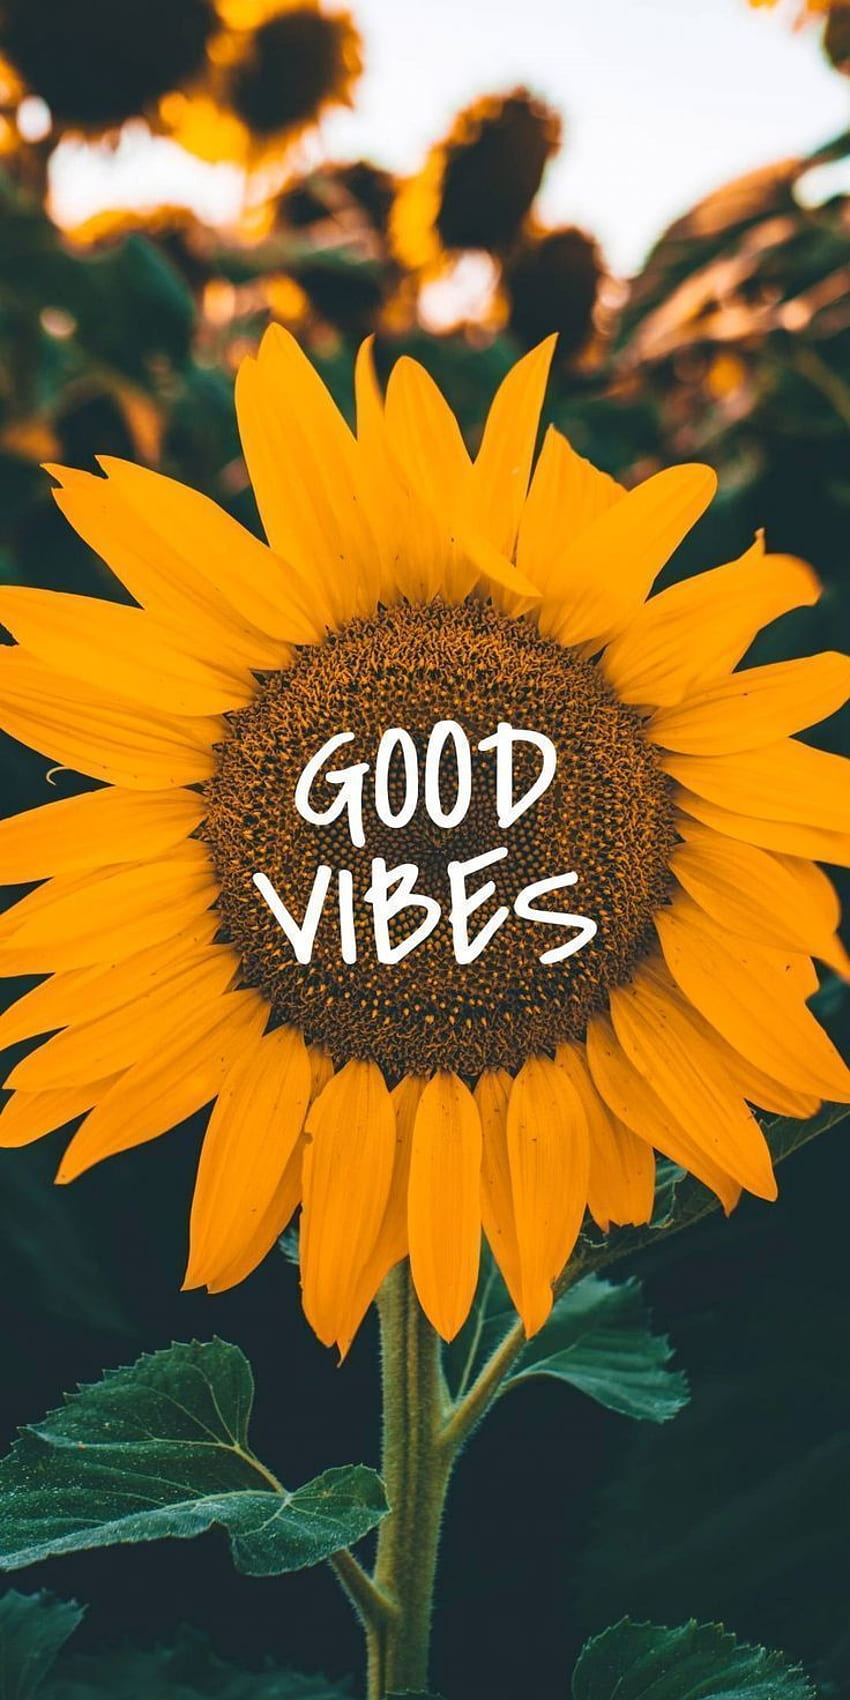 Quotes Vibes Hippie. Quotes Vibes. Sunflower iphone , Good vibes , Sunflower HD phone wallpaper